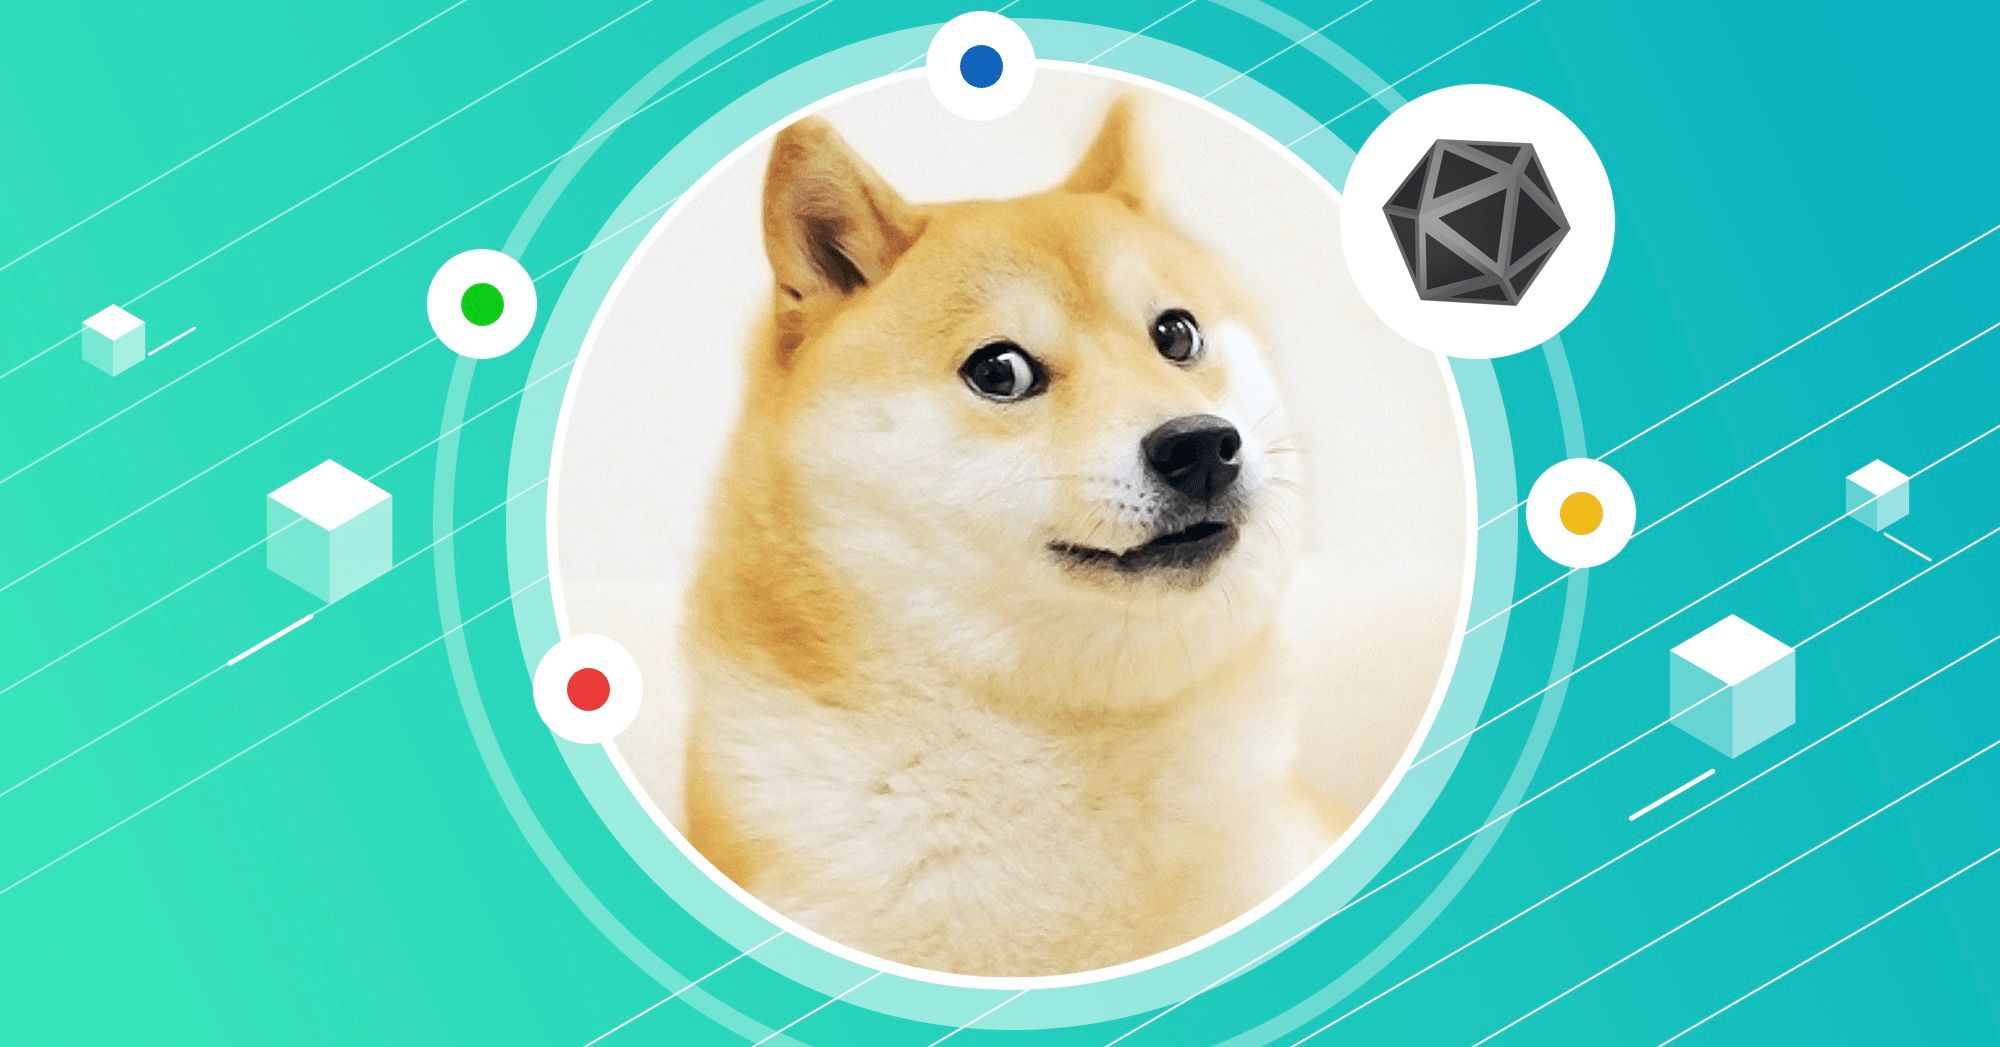 Doges on Trial - Observations from Our Decentralized Curated List Pilot